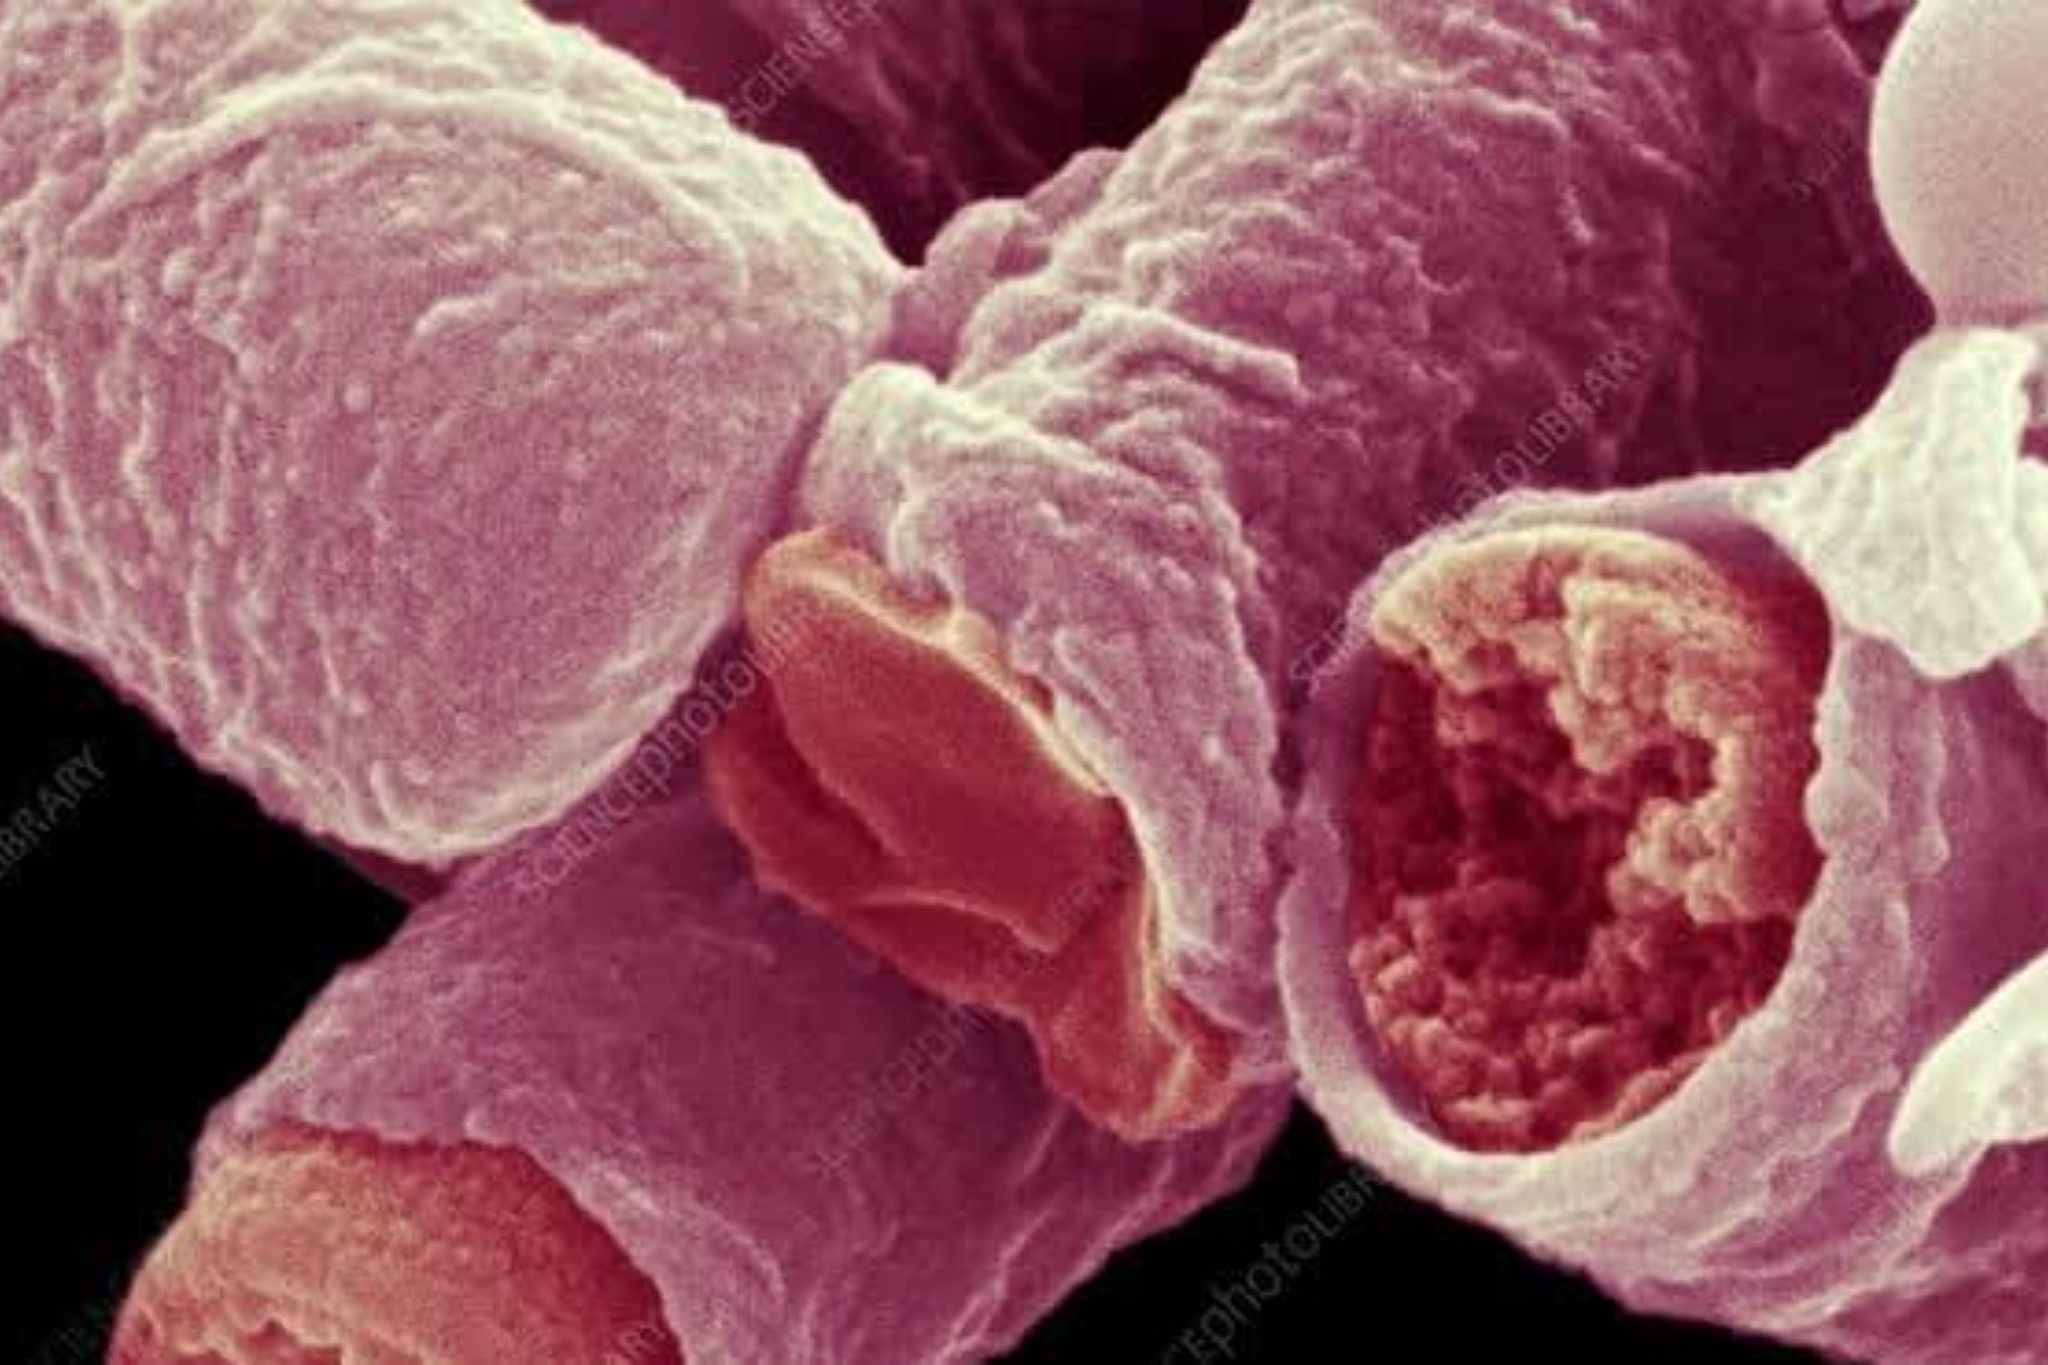 Sierra Leone Government Confirms Outbreak of Anthrax Disease